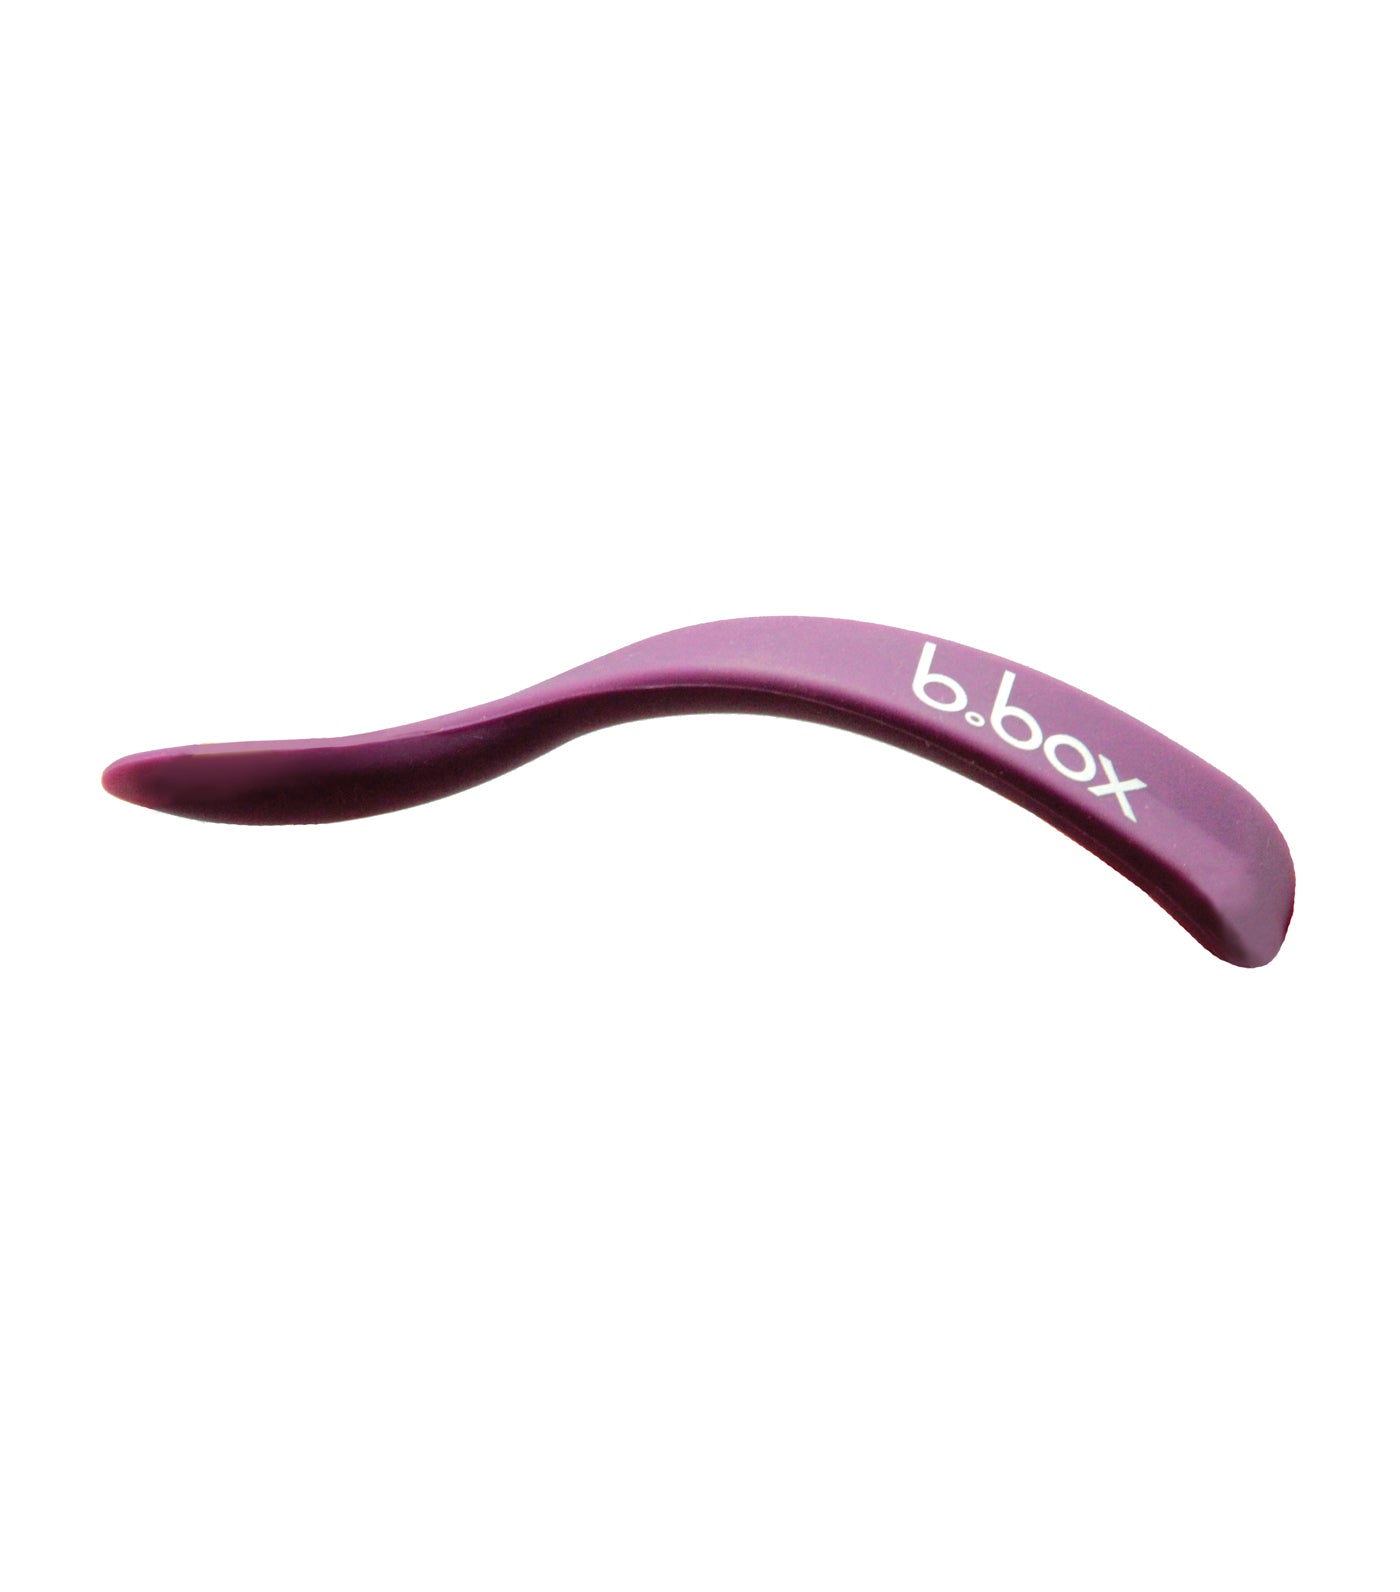 b. box spoon pack pink and purple